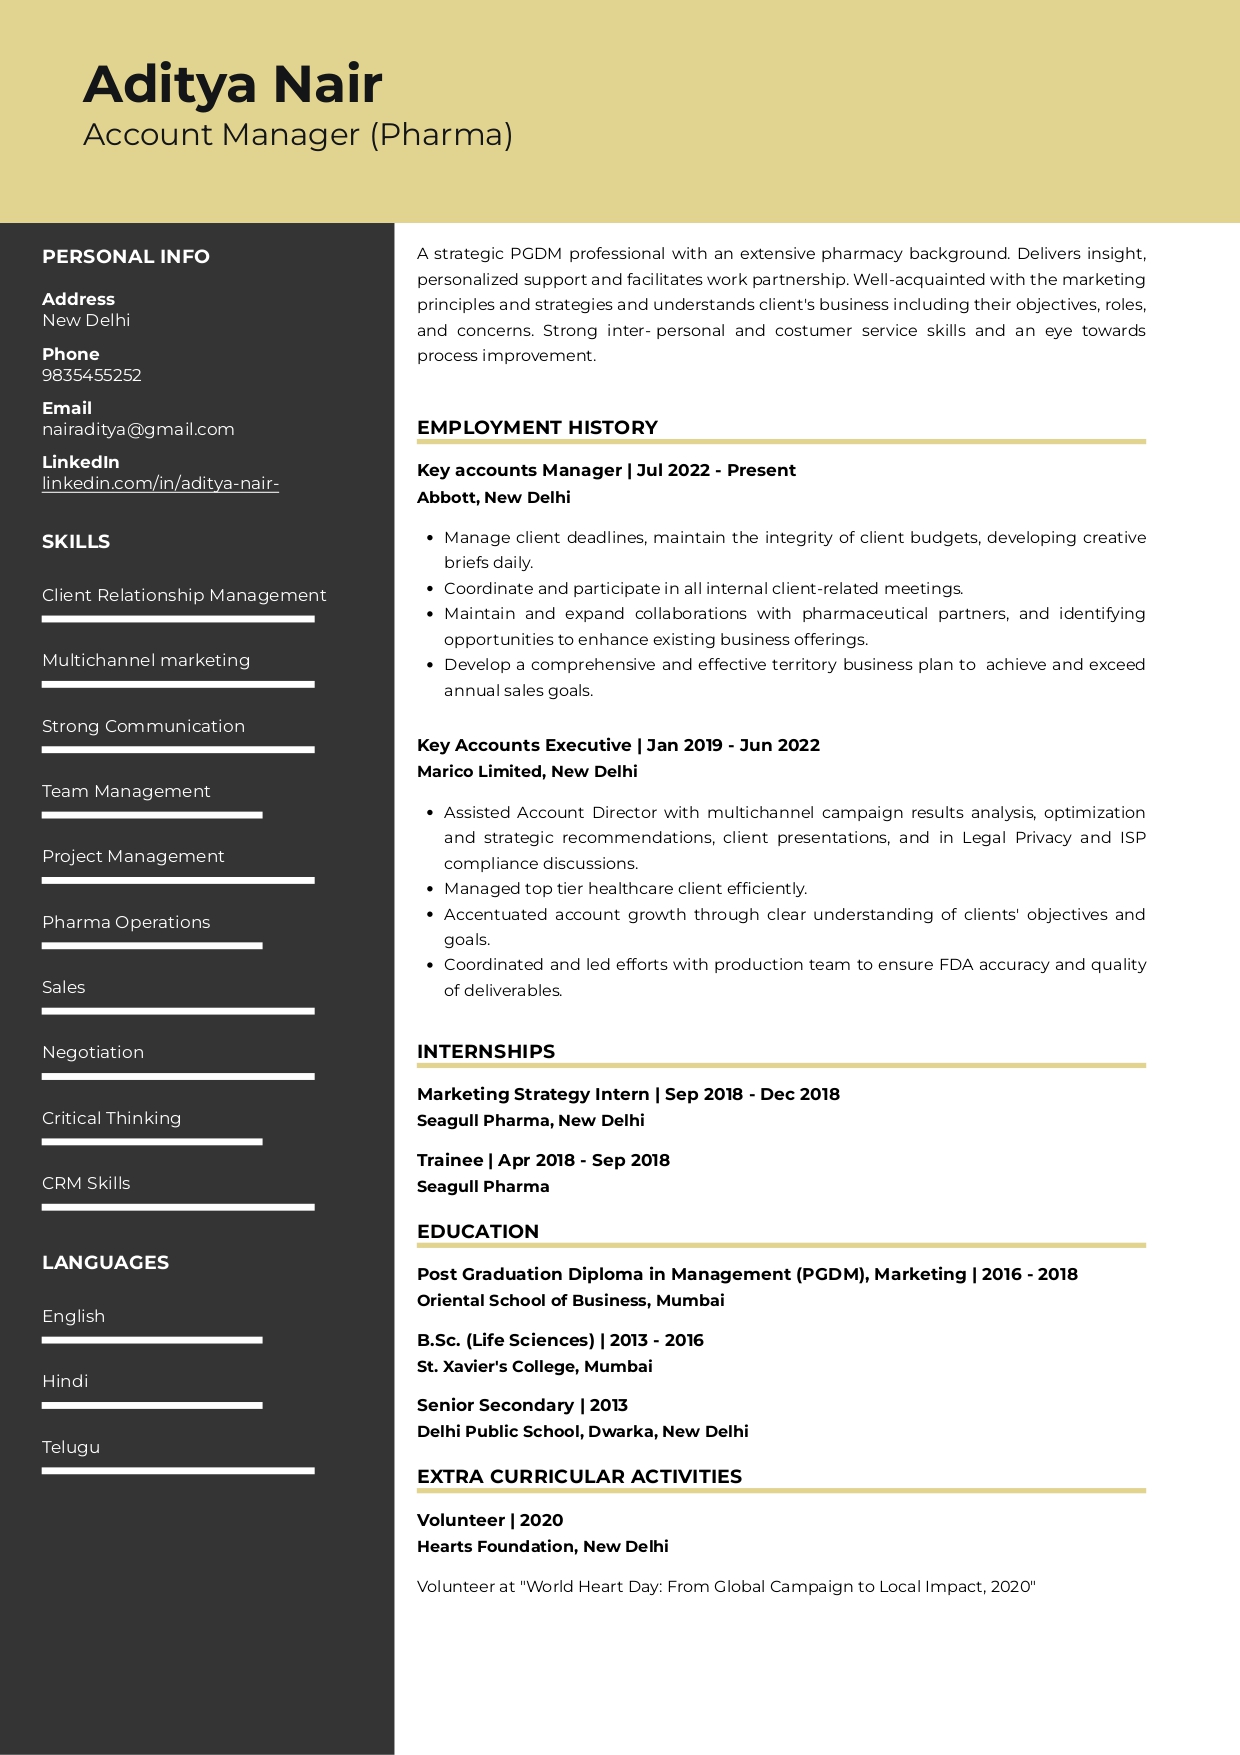 Sample Resume of Account Manager- Pharma | Free Resume Templates & Samples on Resumod.co